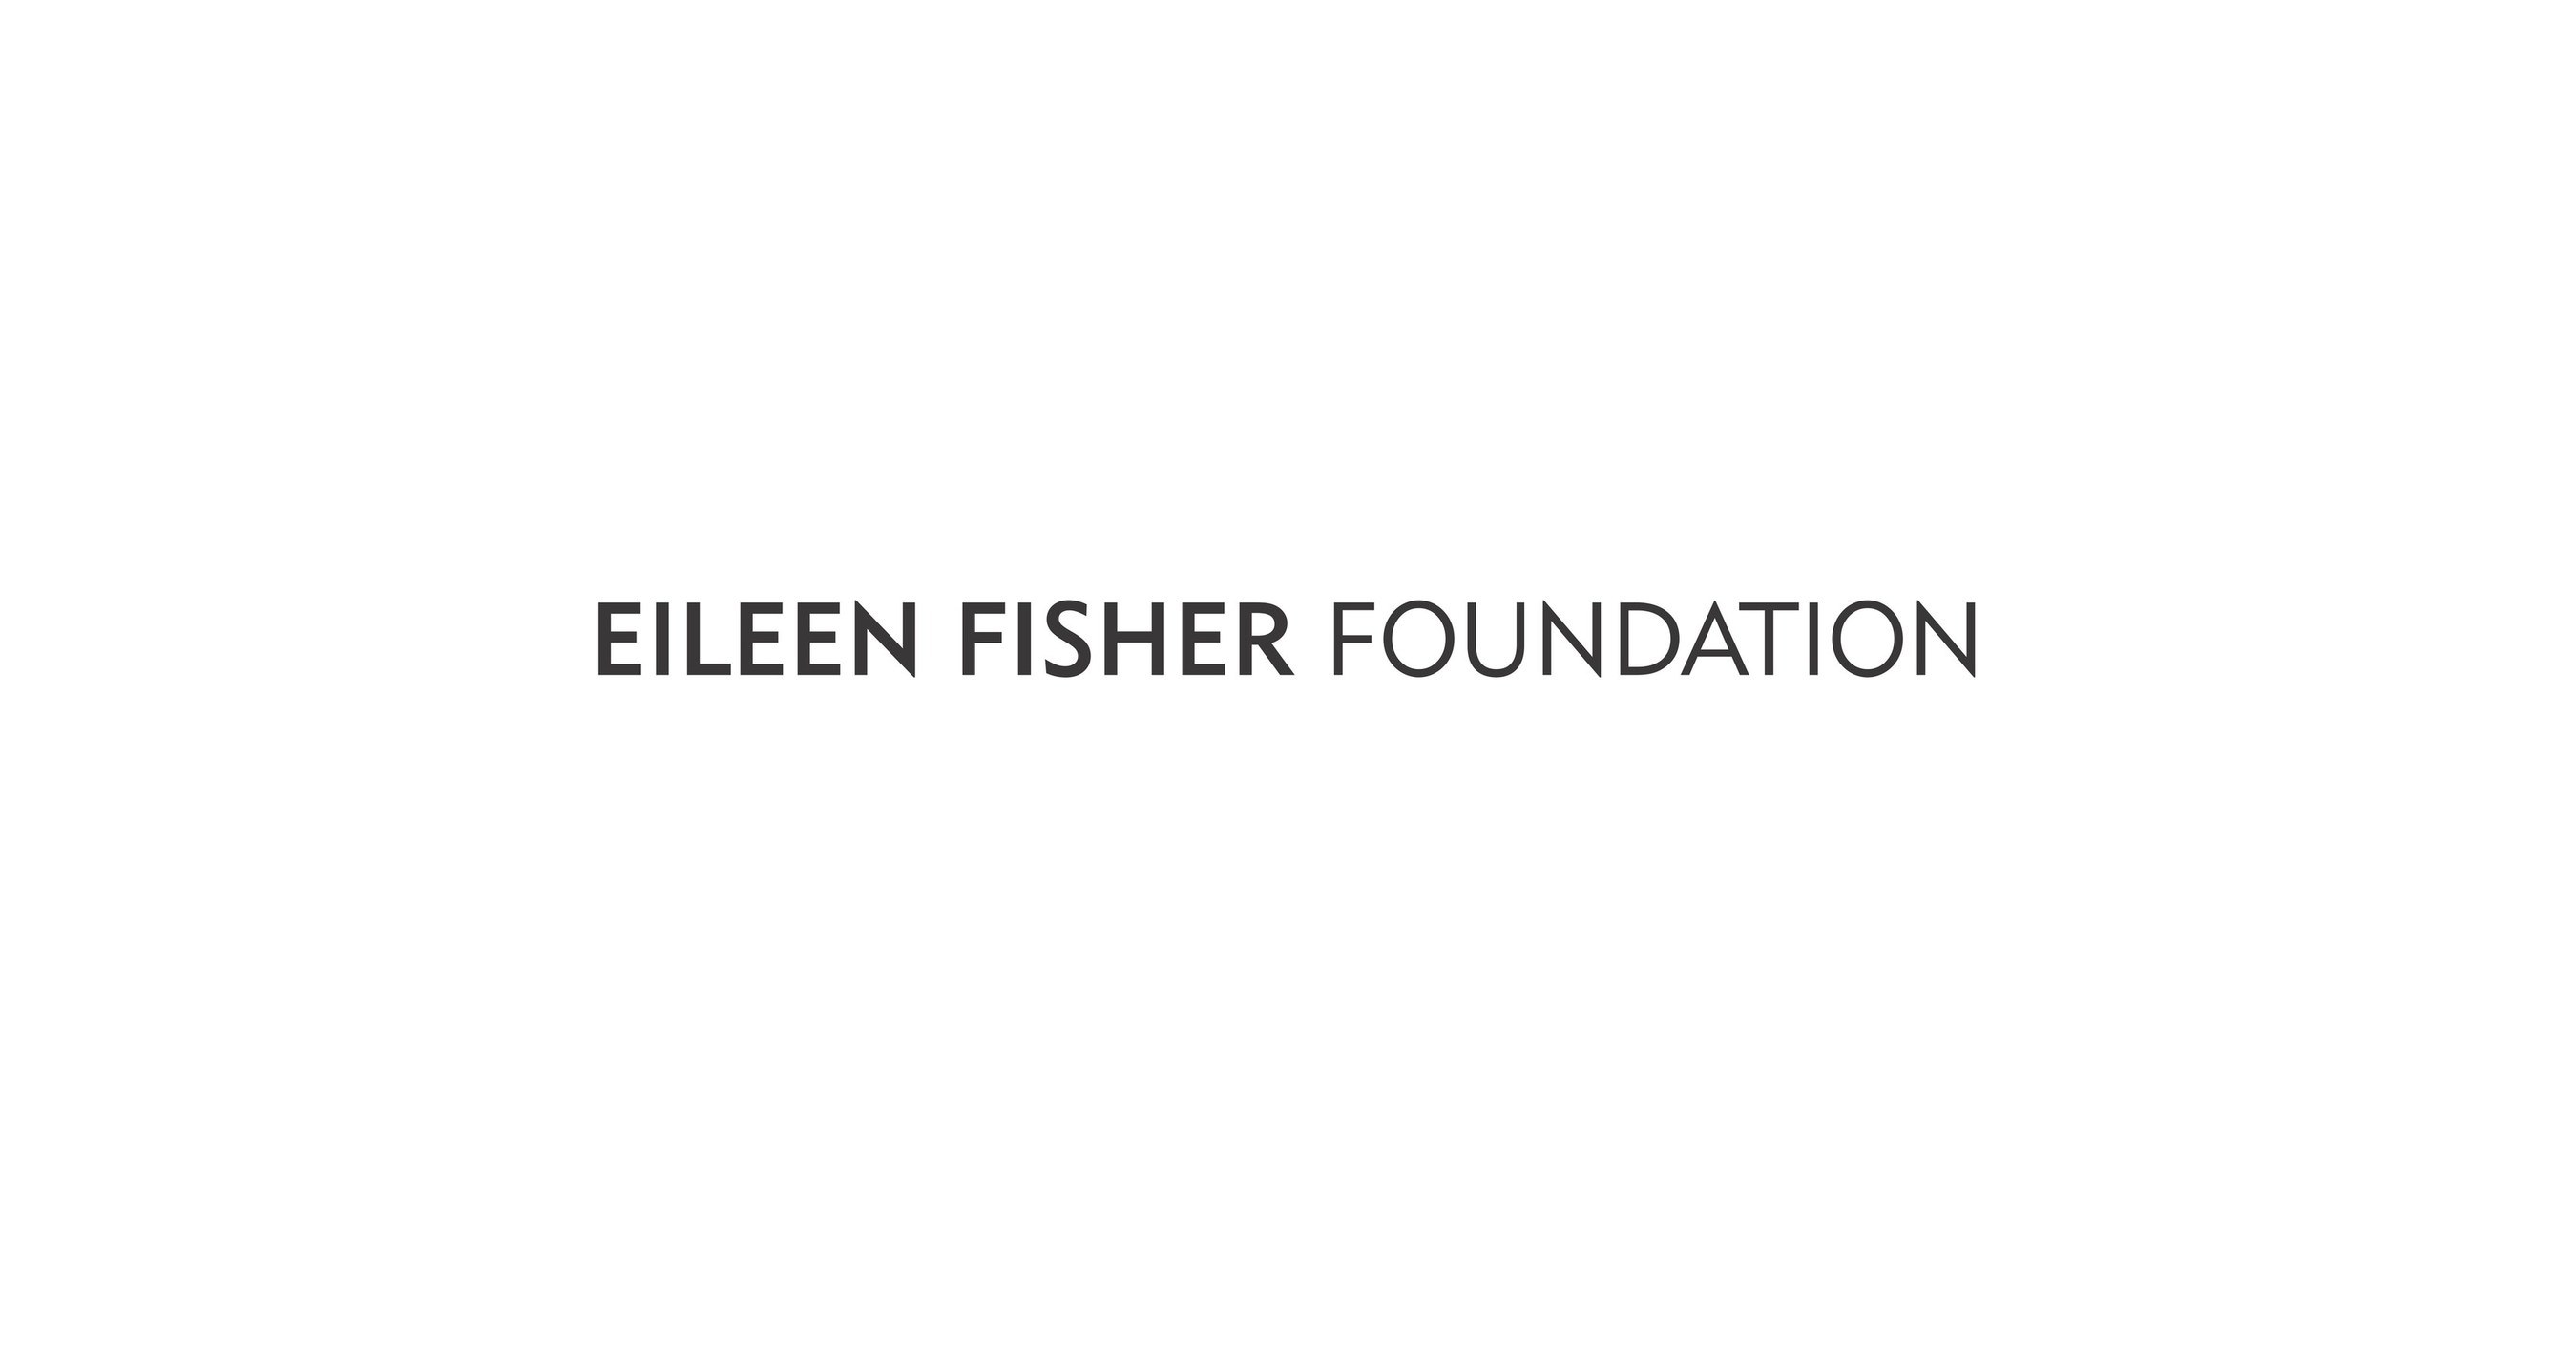 The Eileen Fisher Foundation Launches HEY FASHION!, An Initiative Dedicated to Tackling Fashion’s Waste Crisis